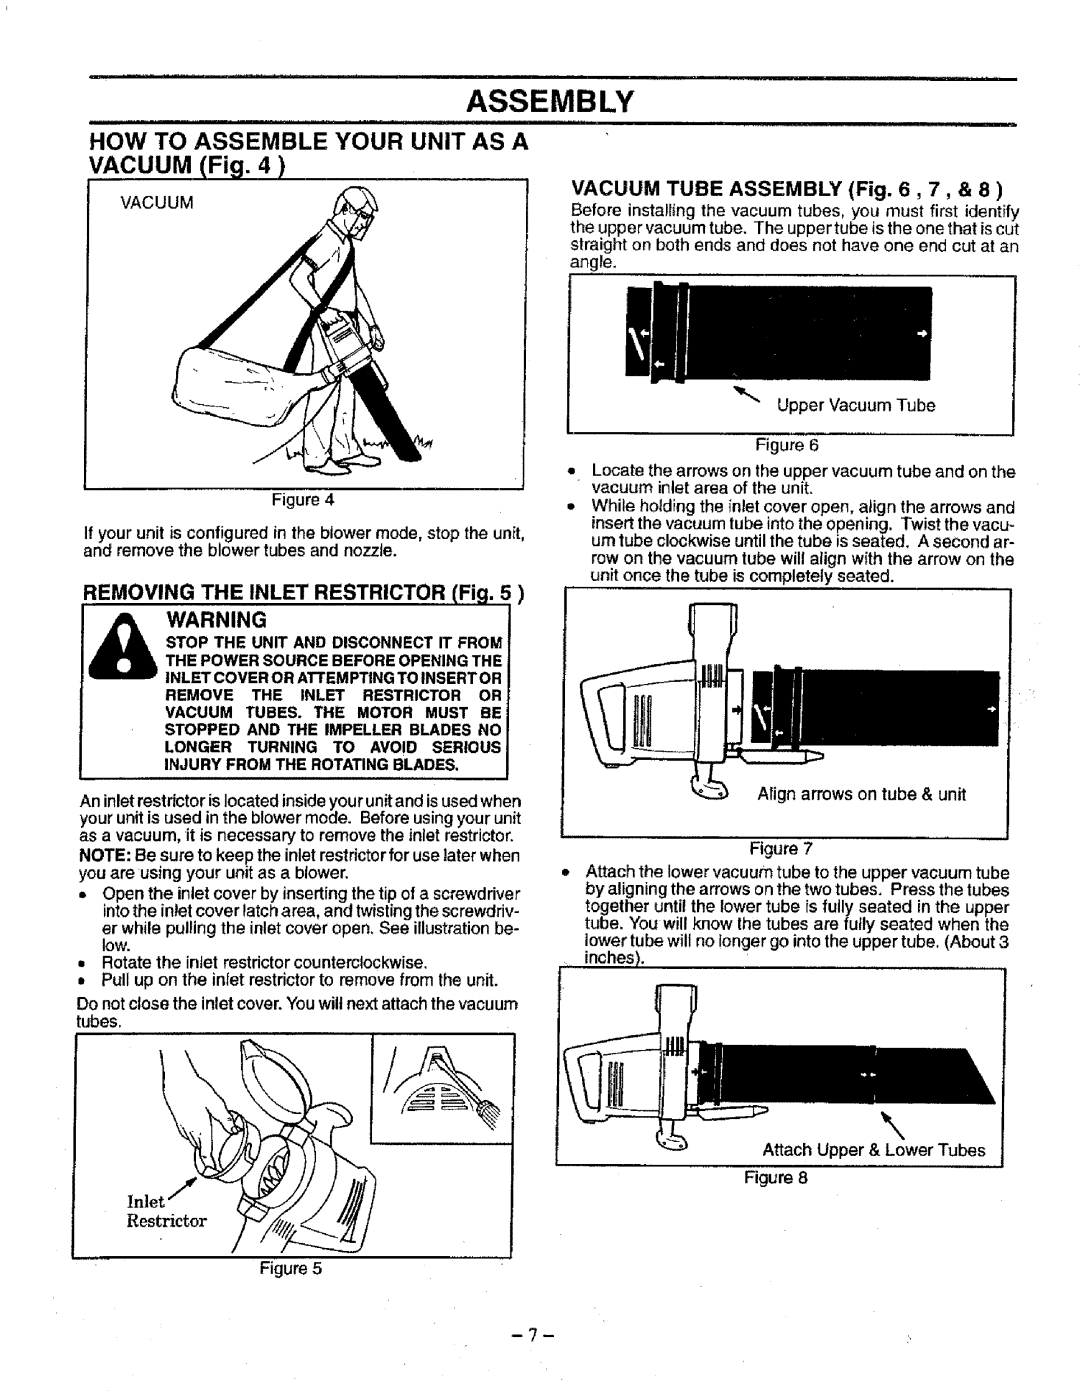 Craftsman 358.798340 manual VACUUM Fig, HoW TO AssEMBLE YOuR UNIT AS A, Vacuum Tube Assembly 